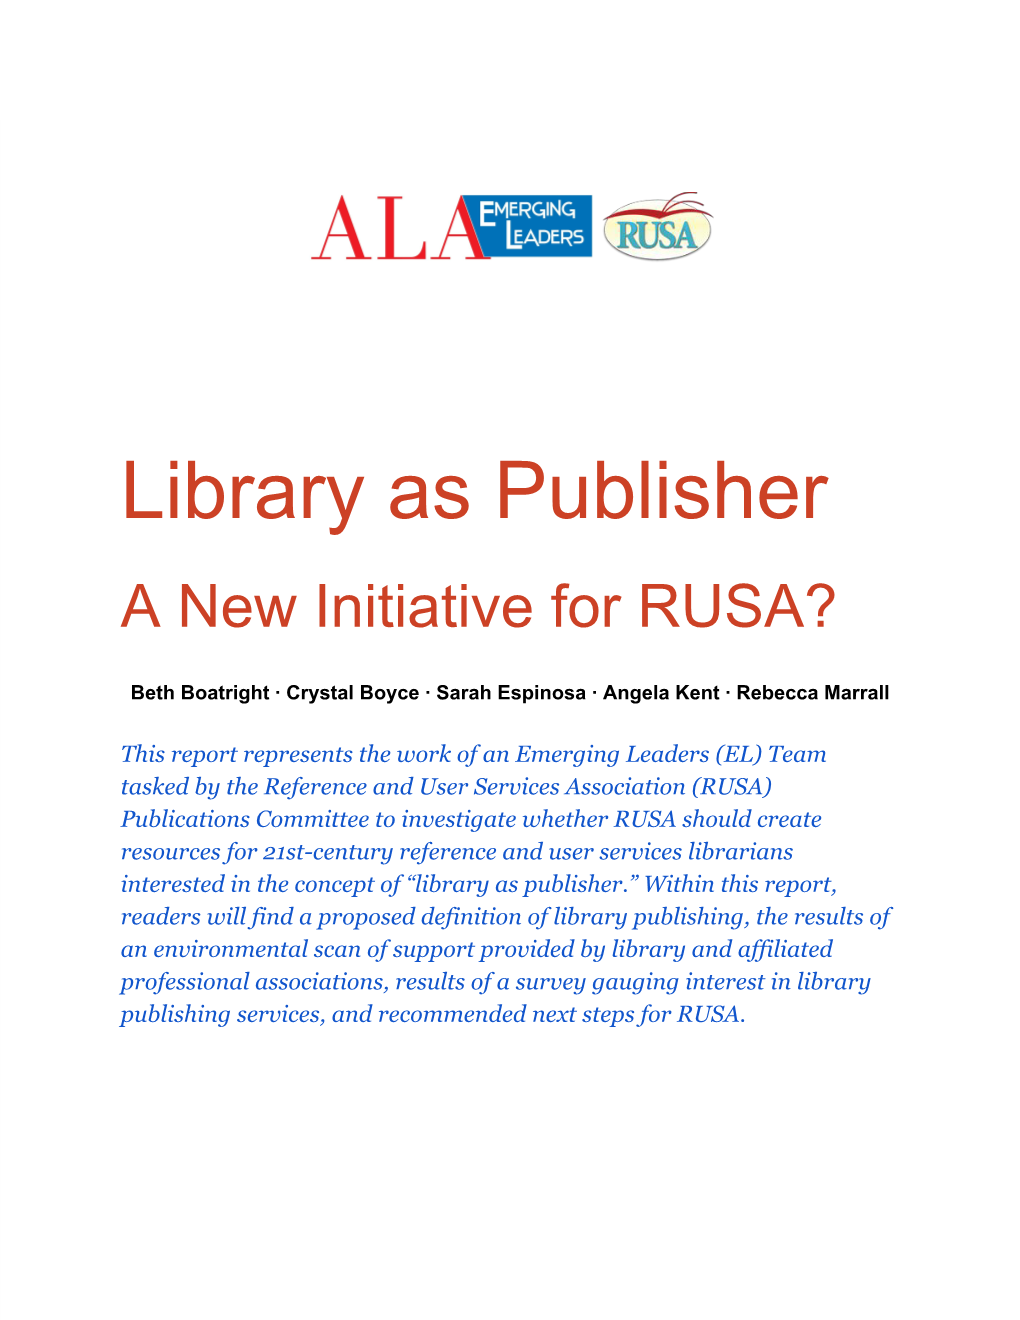 Library As Publisher a New Initiative for RUSA?